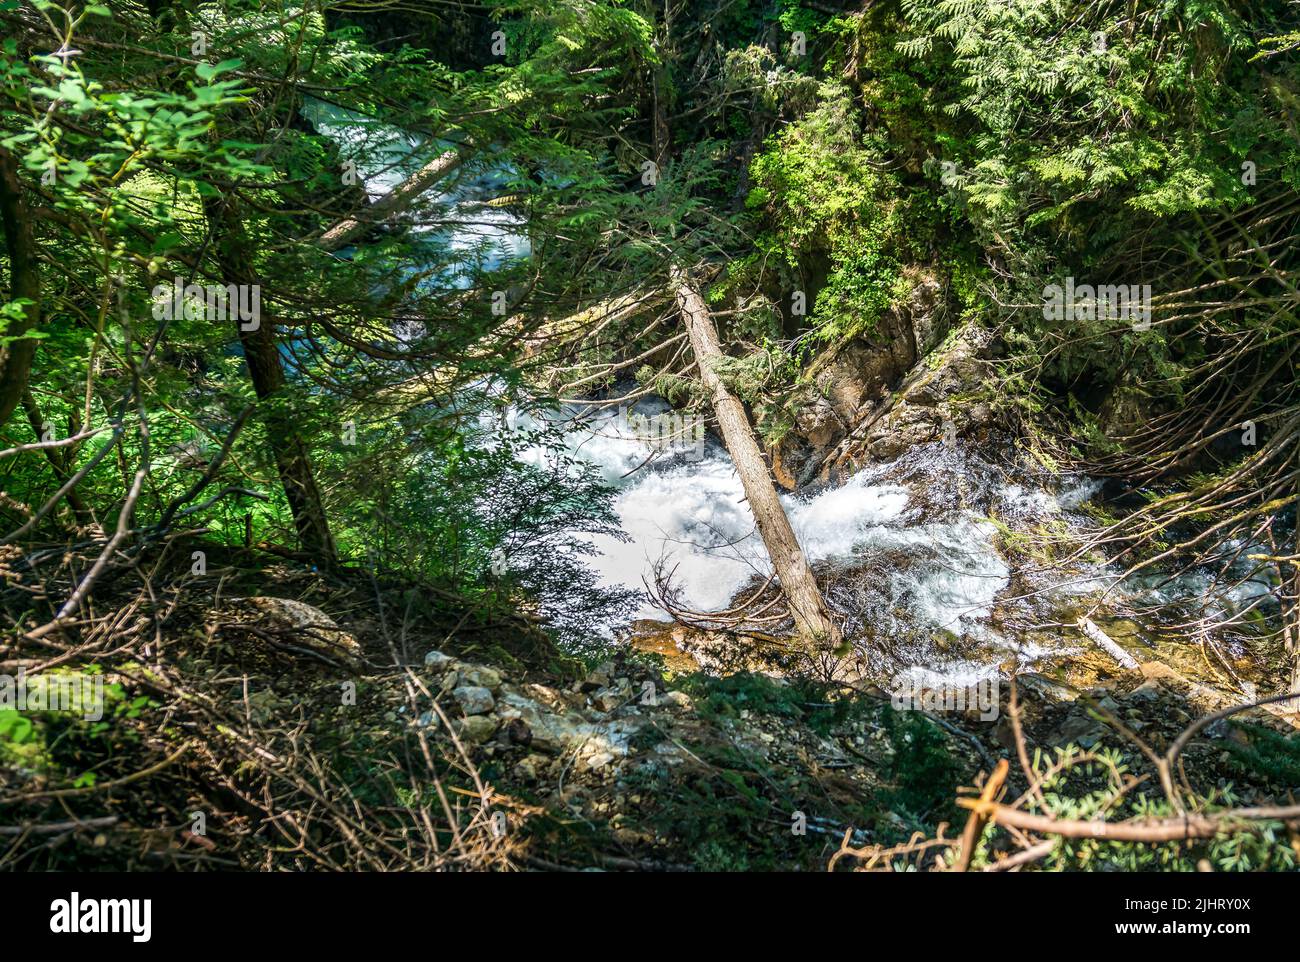 Tree truncks and brandes hang over Denny Creek in Washinton State. Stock Photo